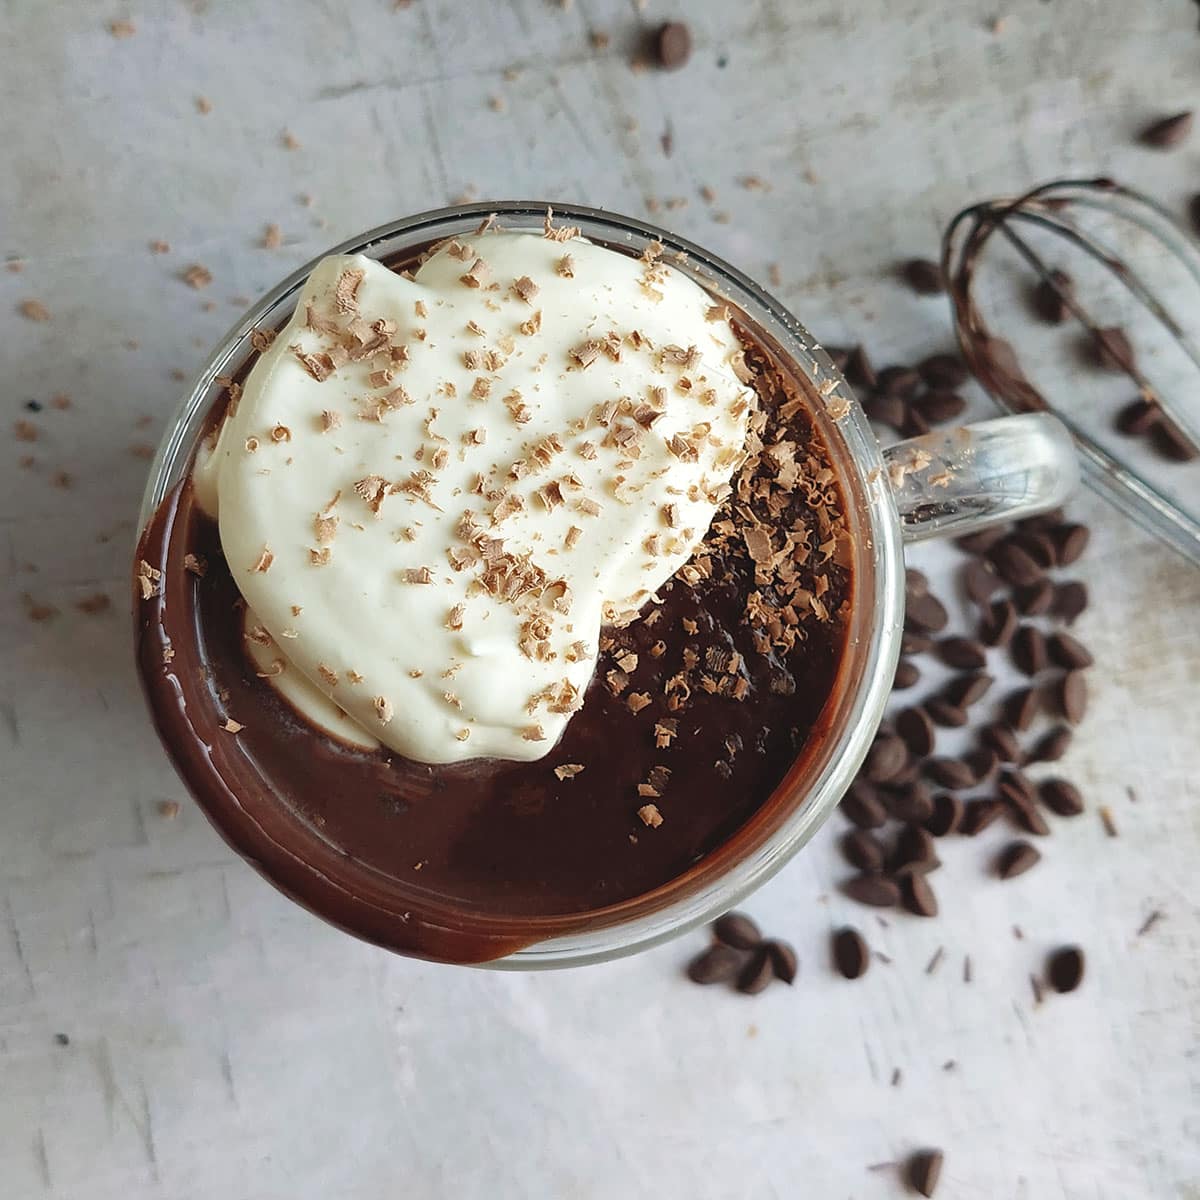 Italian hot chocolate topped with whipped cream